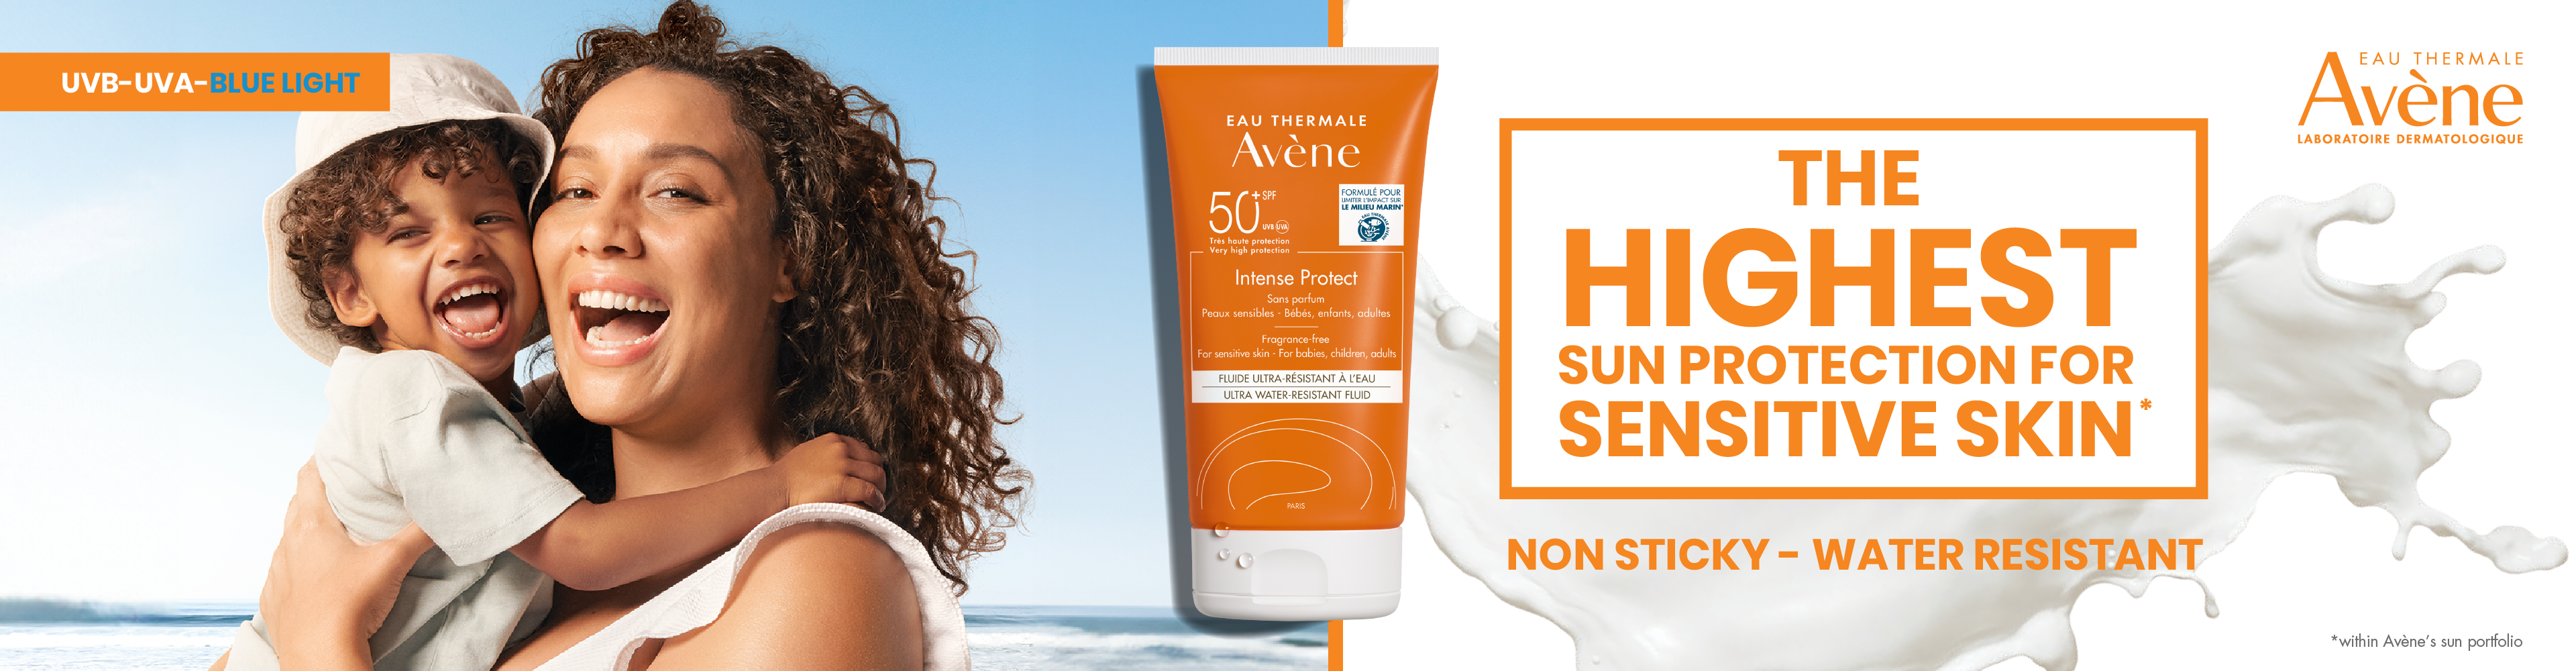 Avene Intense Protect - The highest sun protection for sensitive skin. Non sticky and water resistant.